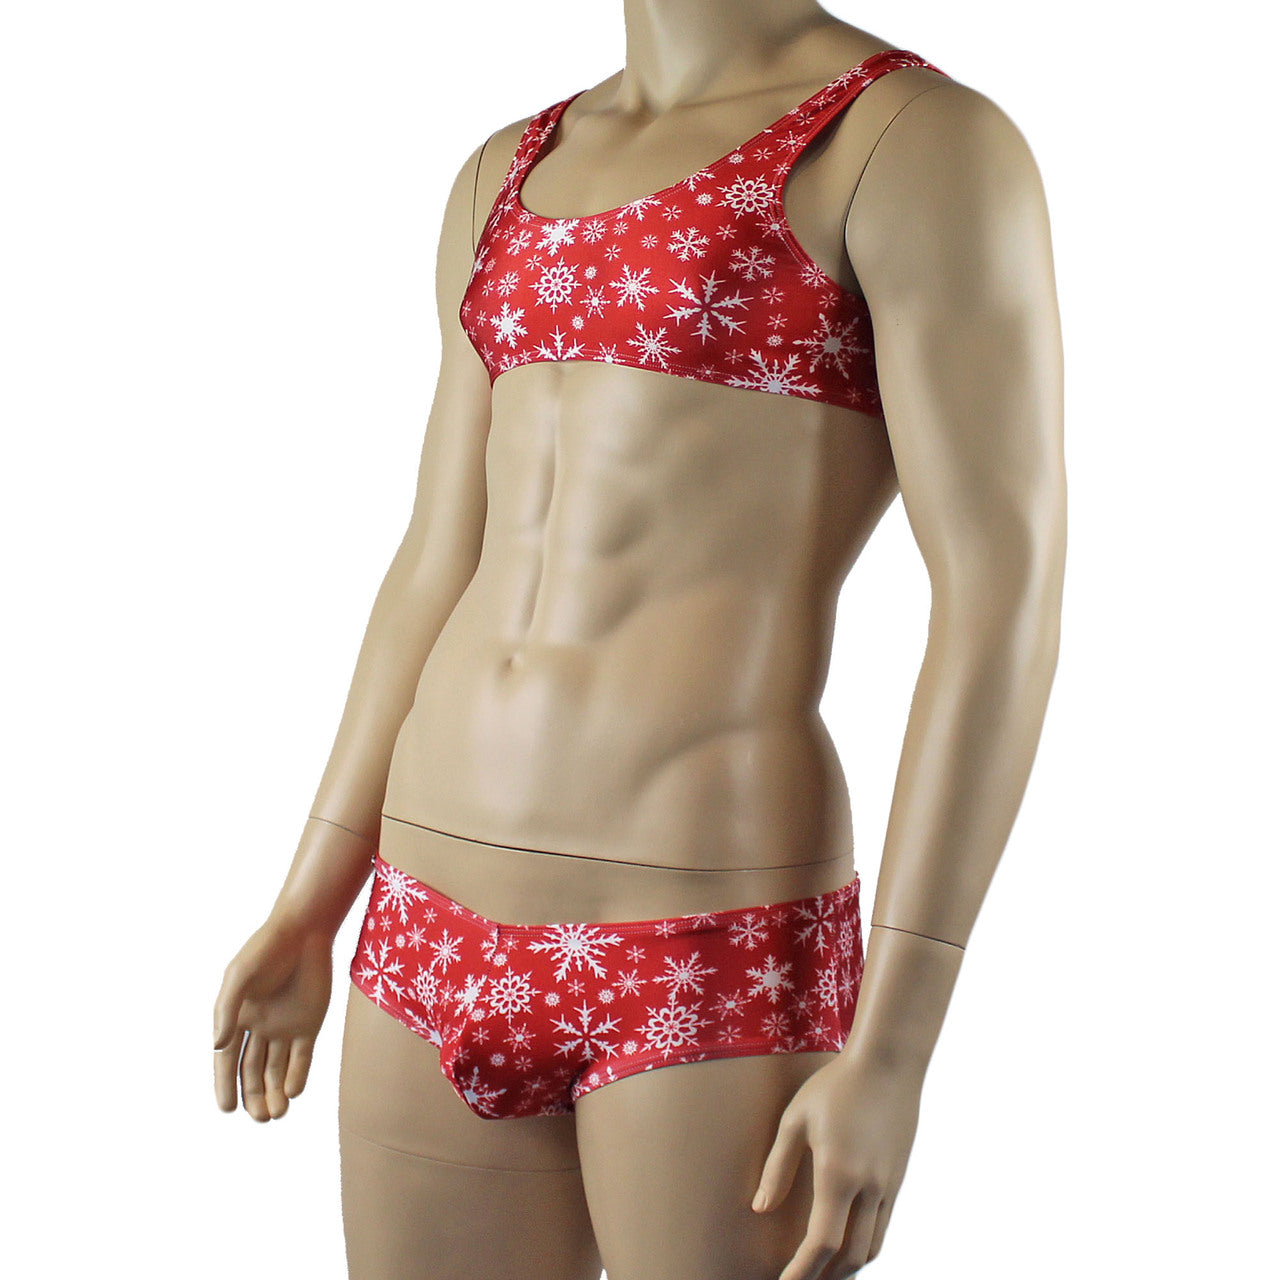 Mens Christmas Snowflake Bra Top & Low Rise Boxer Brief Red and White